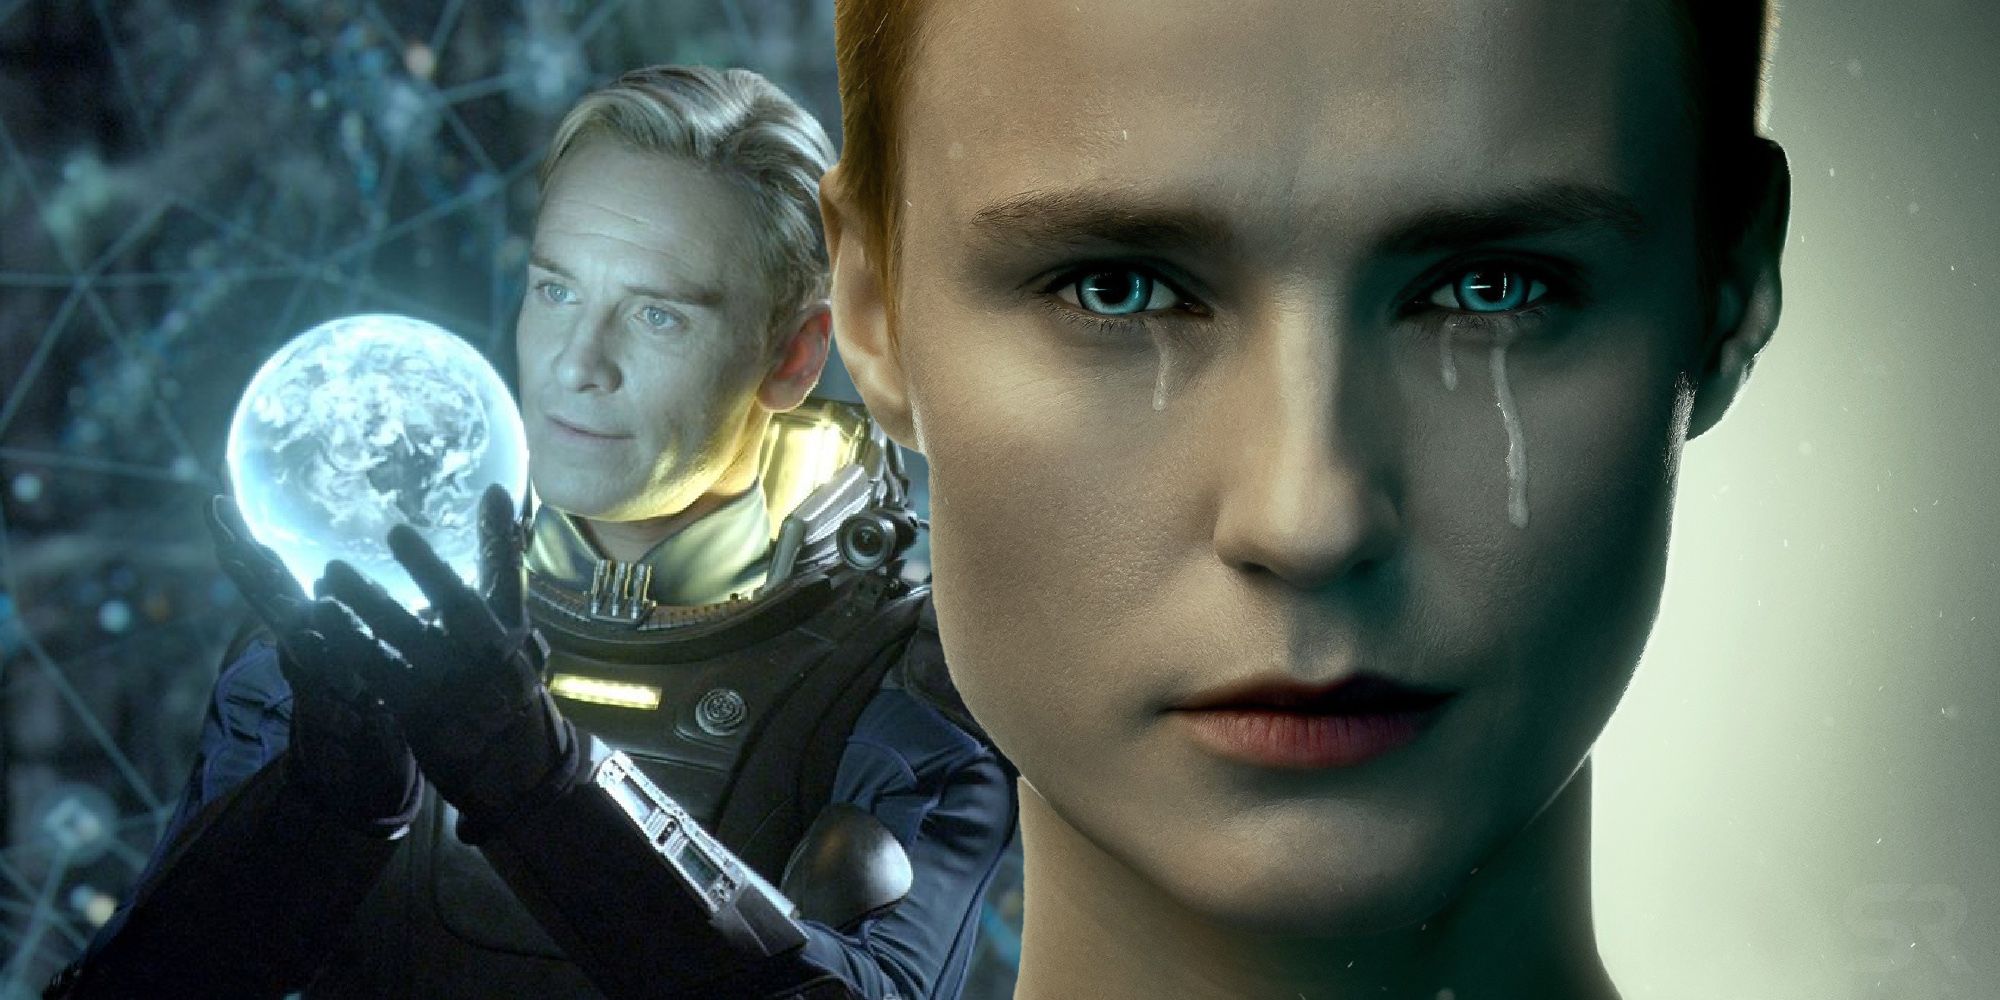 Raised By Wolves How The Androids Compare To Ridley Scott SciFi Movies